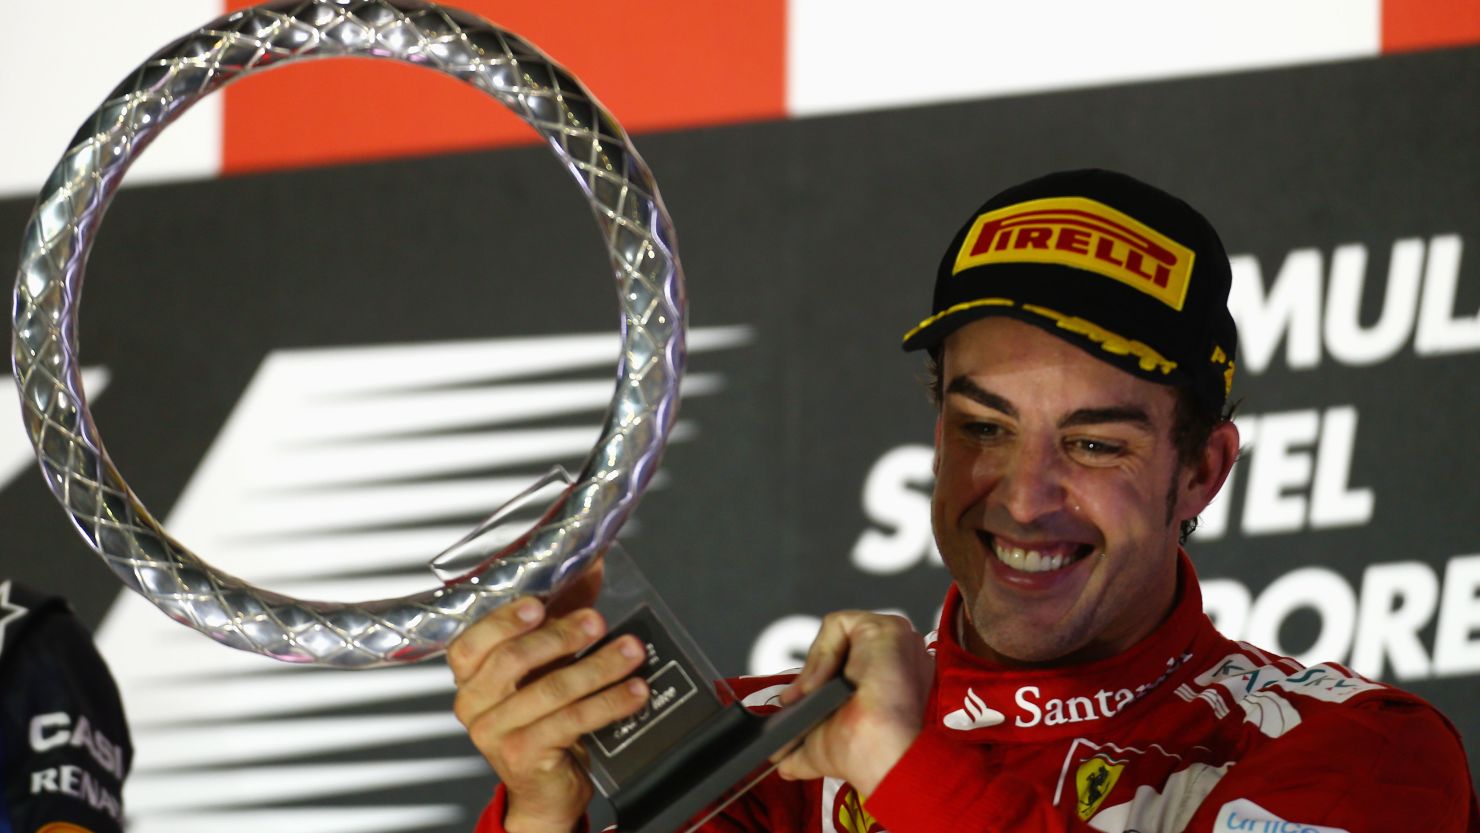 Ferrari's Spanish driver Fernando Alonso won back-to-back world championship title in 2005 and 2006.